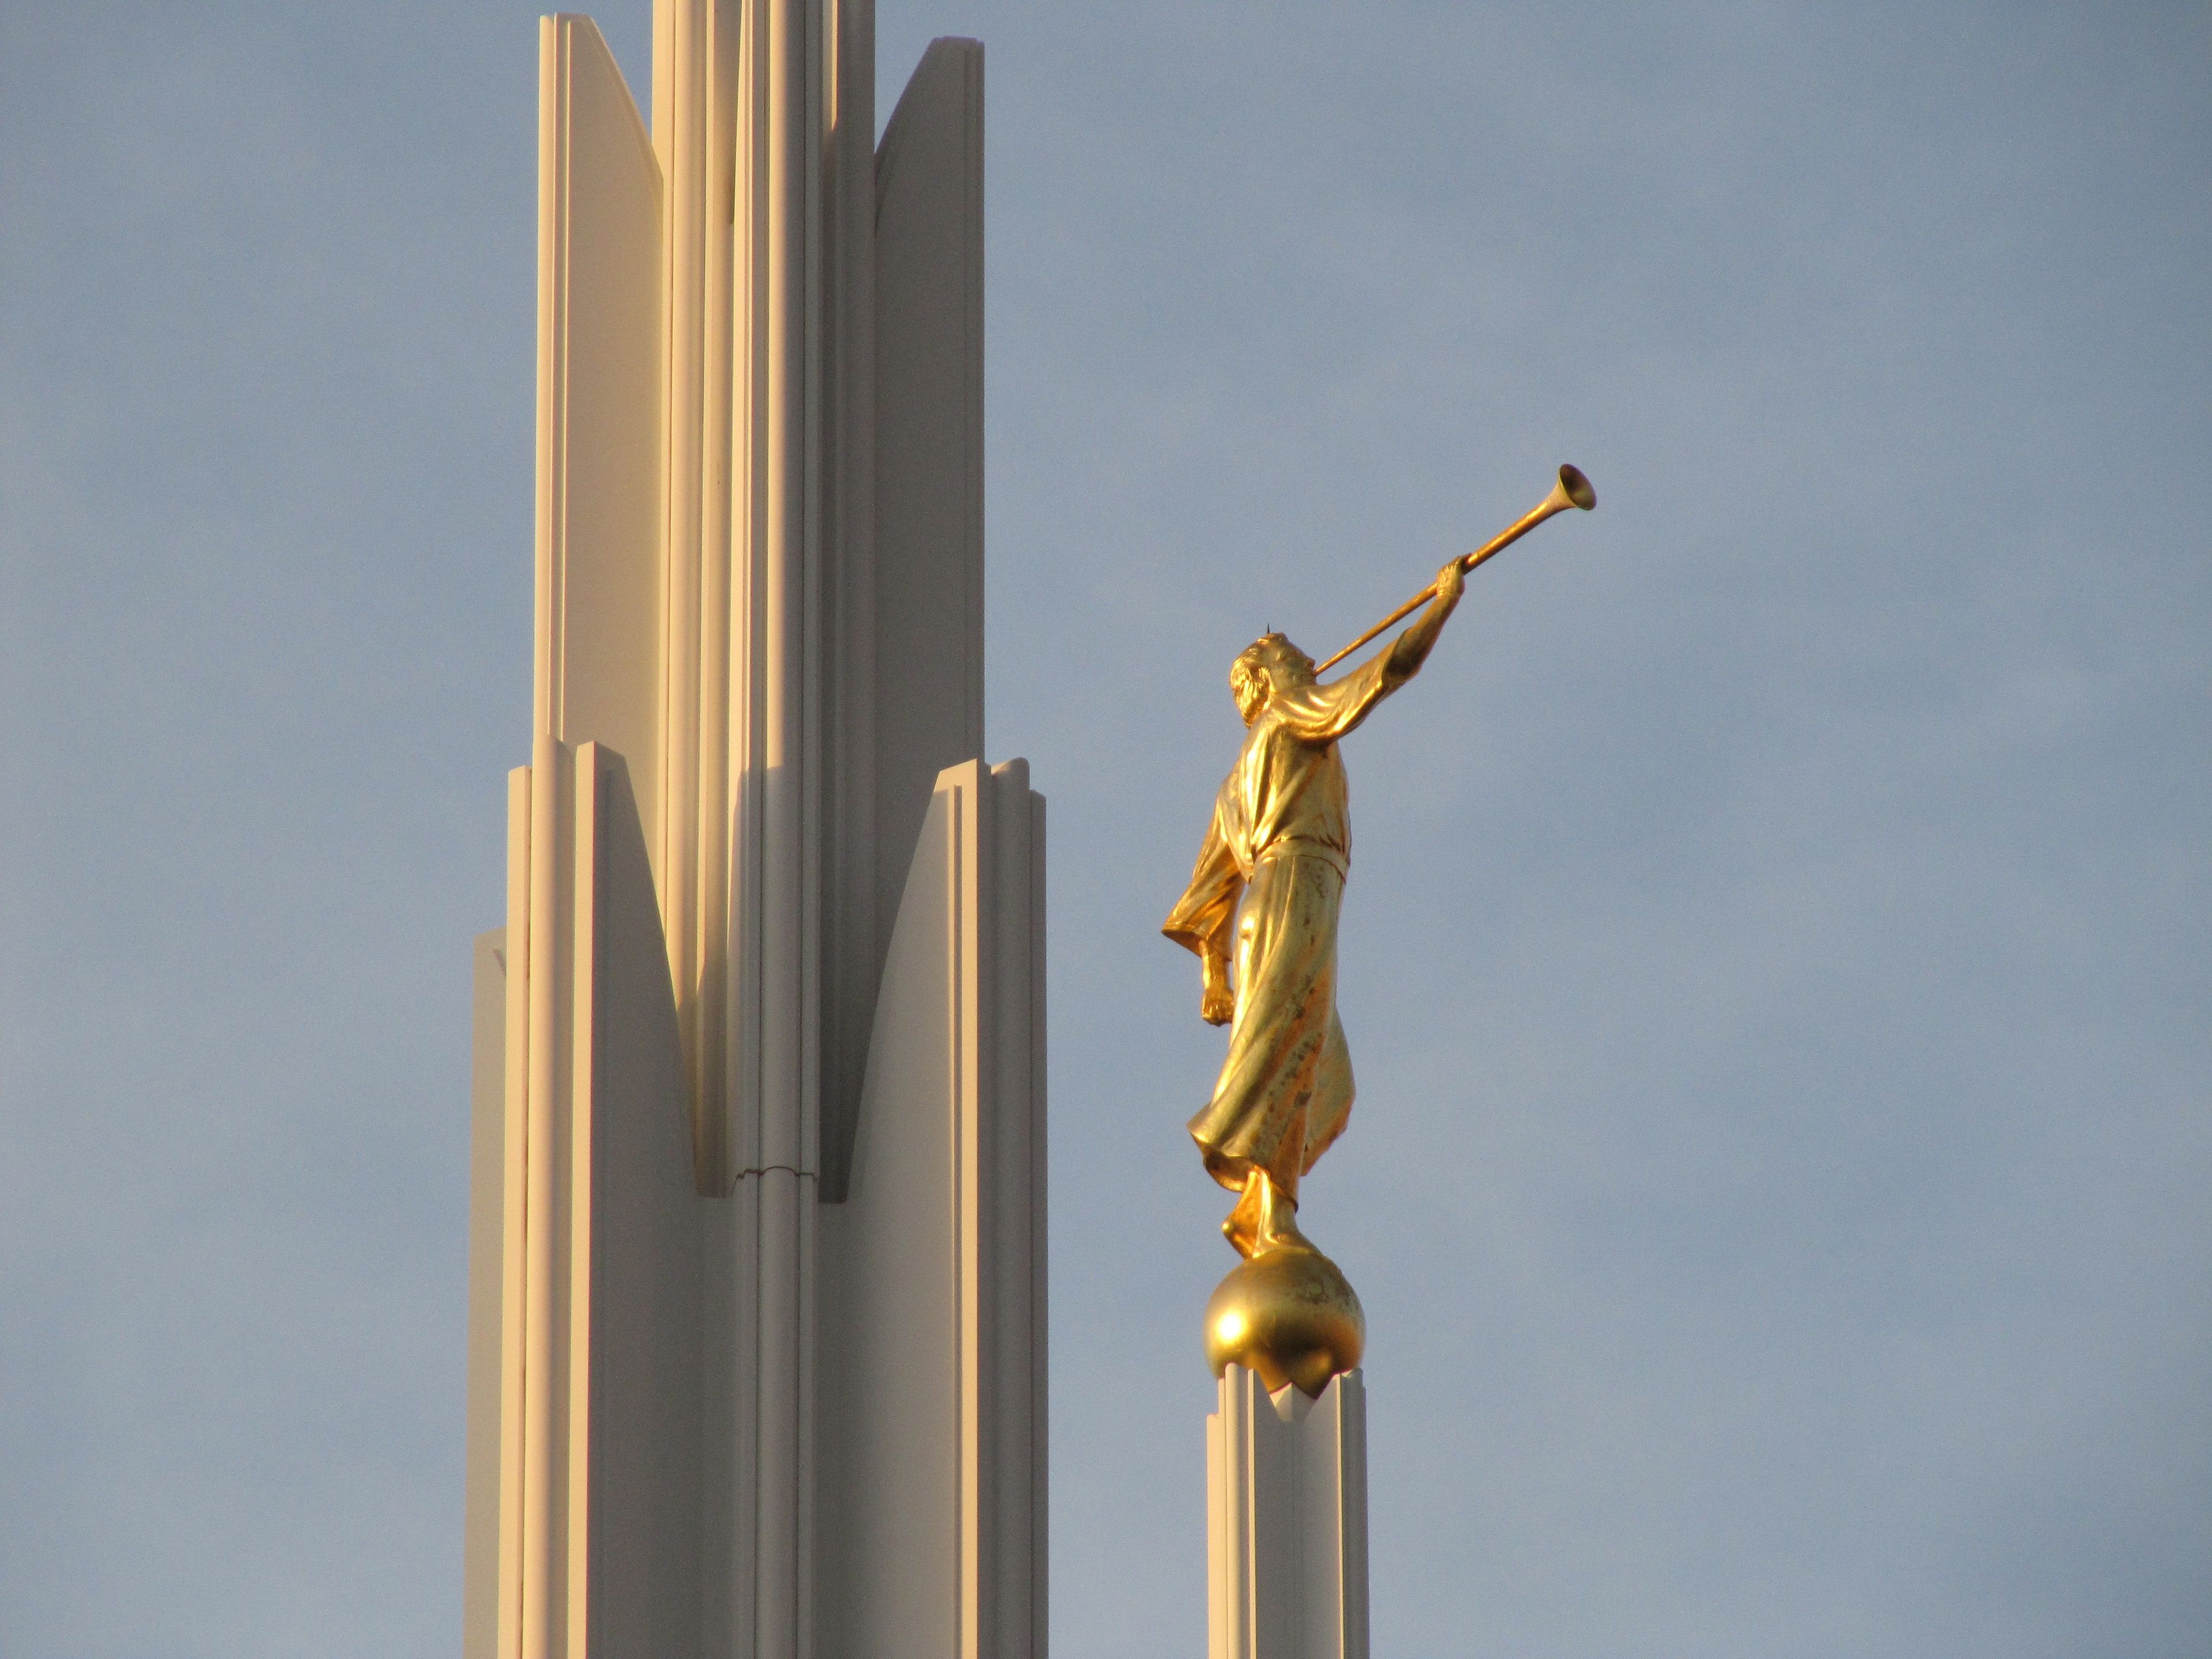 The Las Vegas Nevada Temple spires, including the angel Moroni.